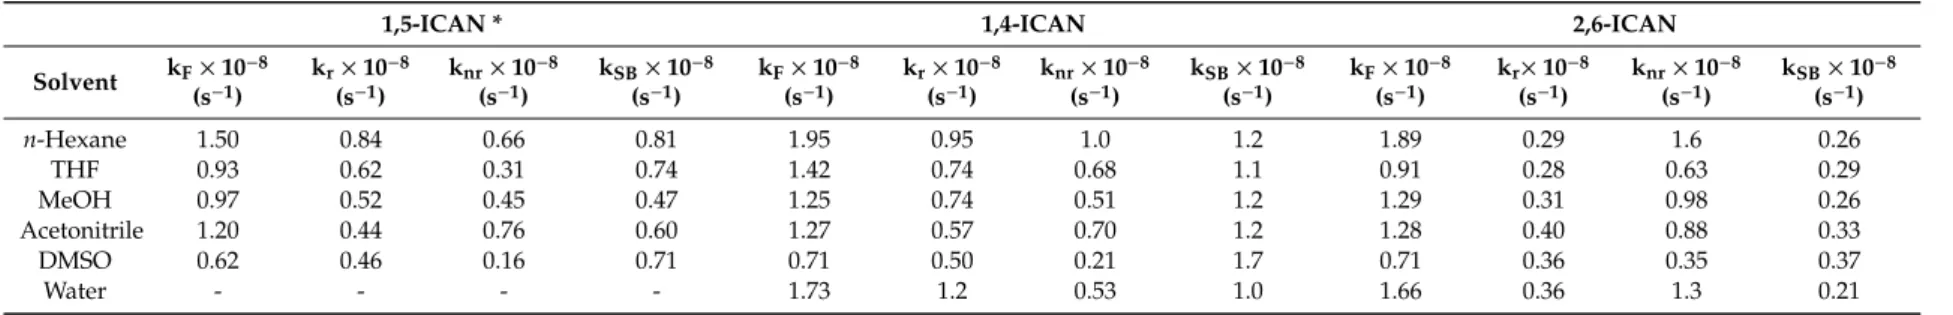 Table 4. The fluorescence decay rate (k F ), the radiative decay rate (k r ), the non-radiative decay rate (k nr ), and the radiative decay rate (k SB ) calculated by the Strickler–Berg equation (Equation (5)) for the ICAN isomers.